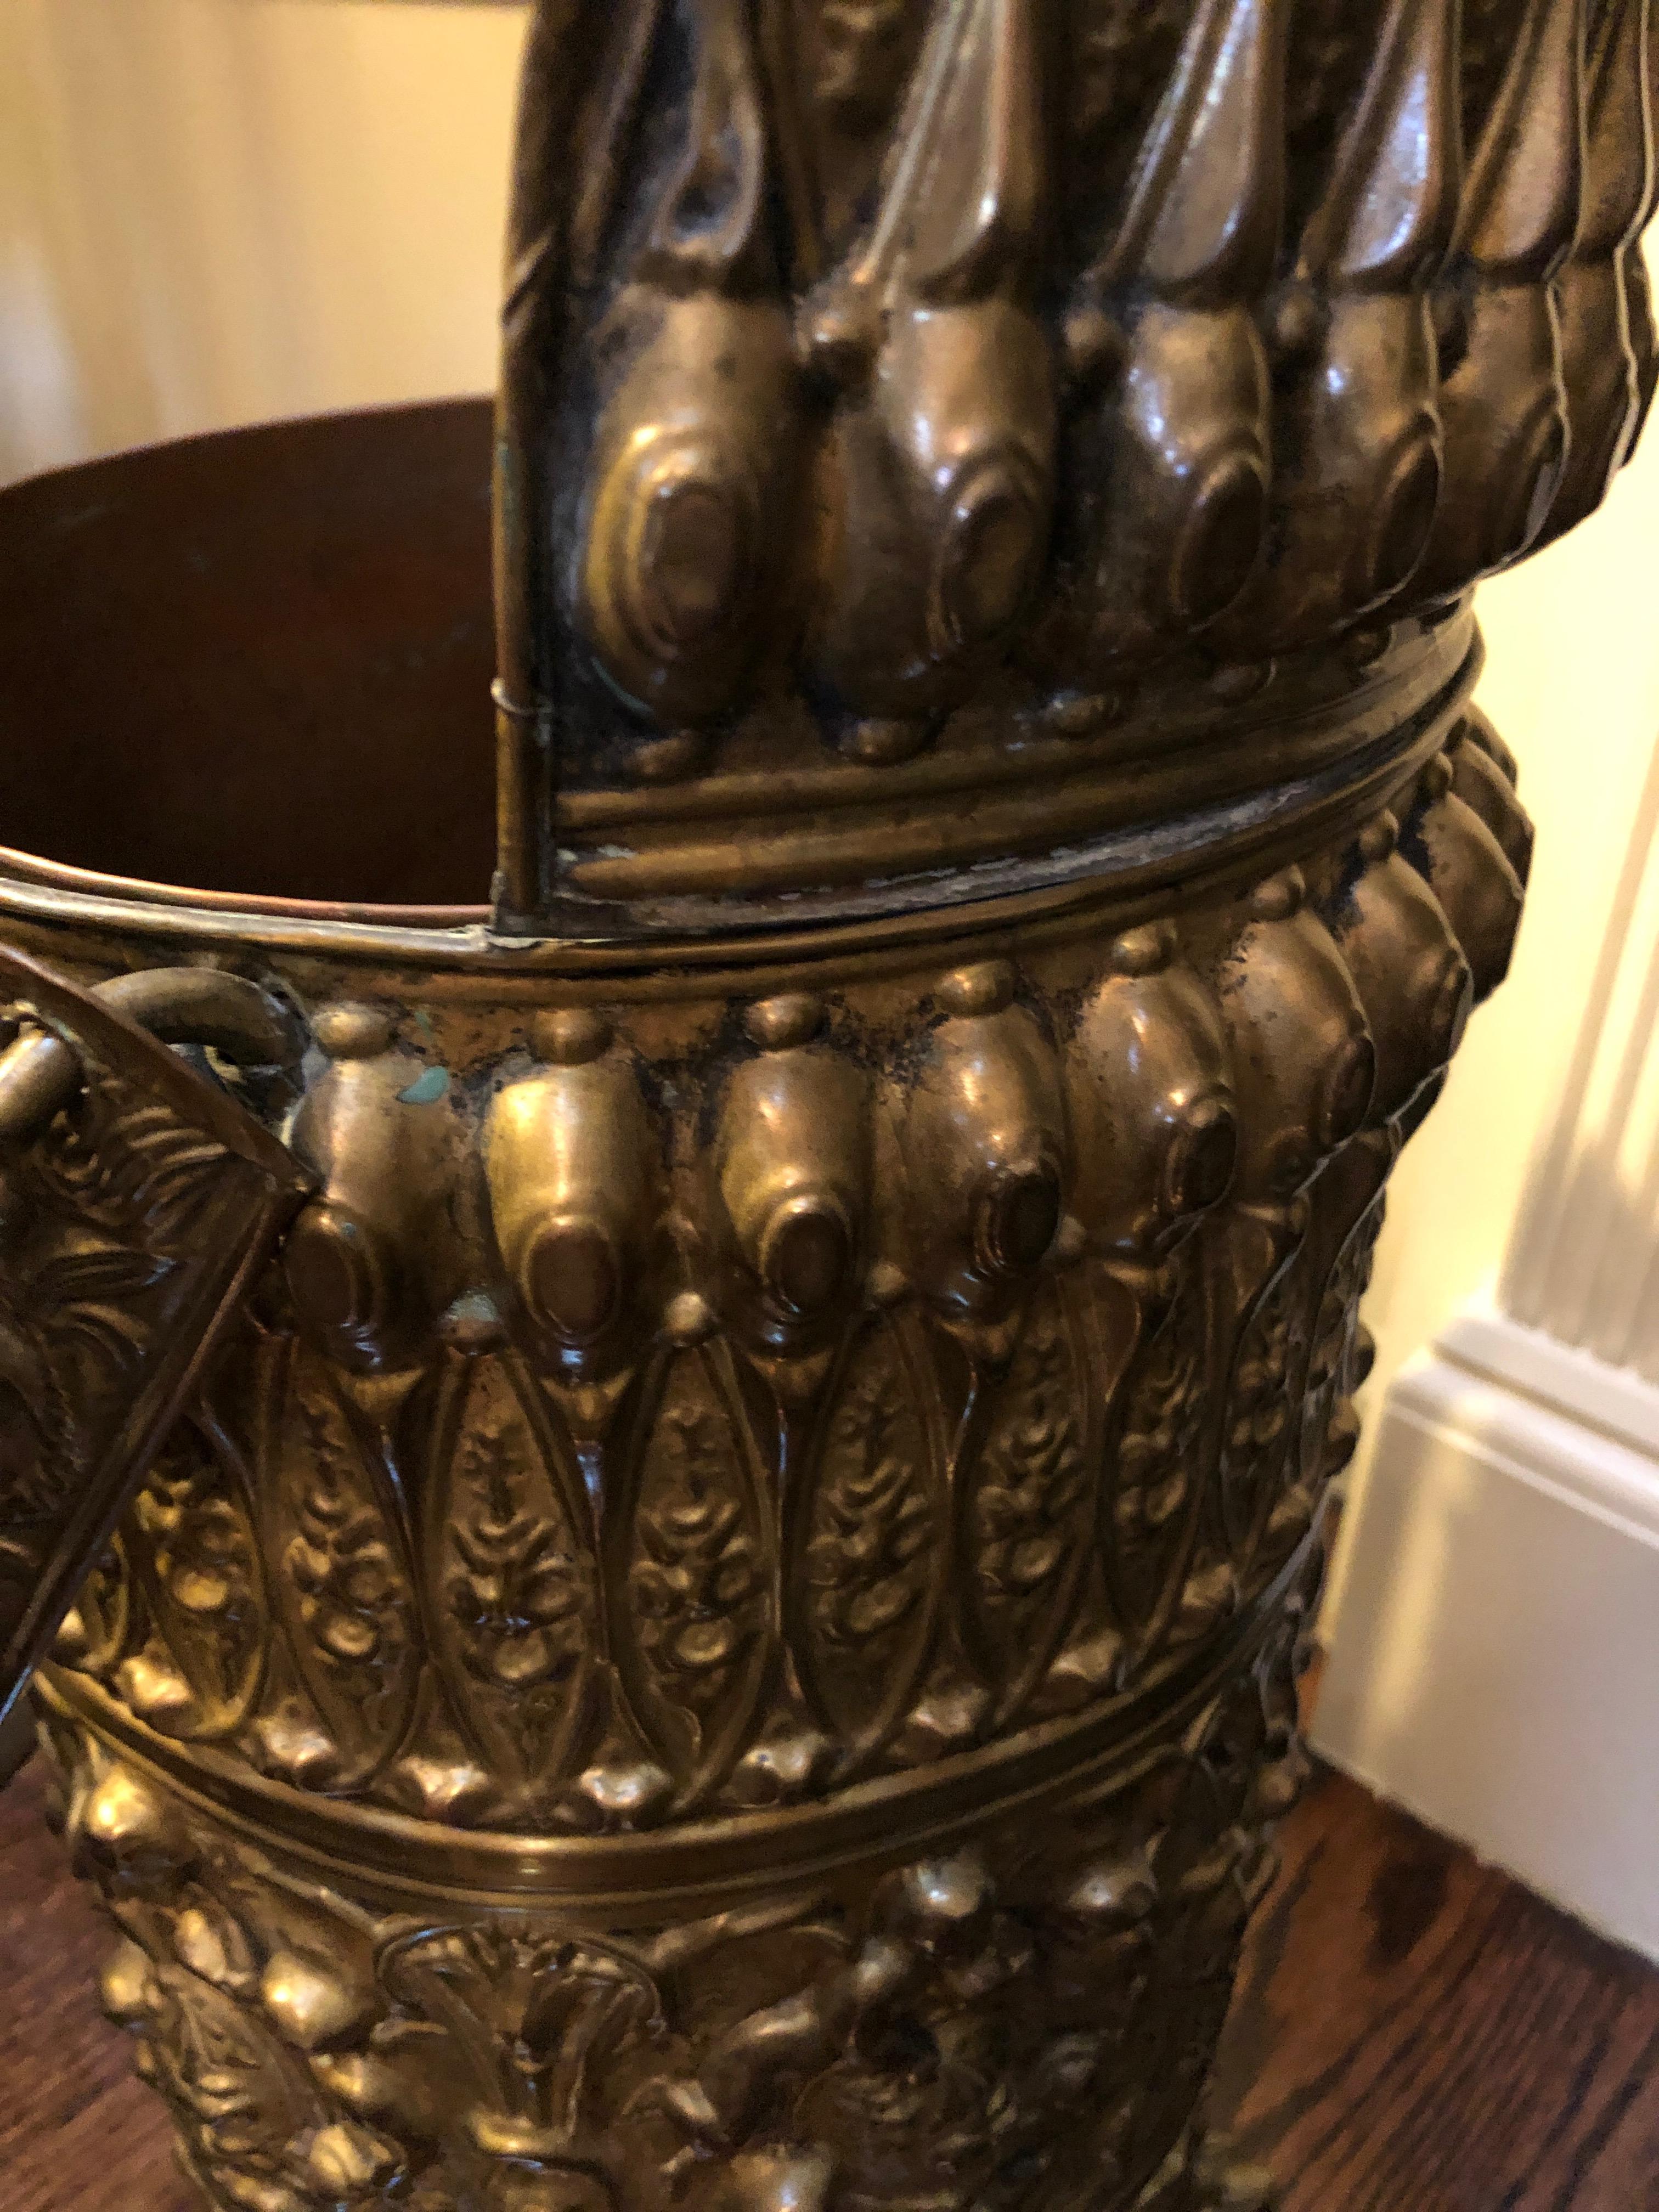 Wonderful example of a Victorian brass coal scuttle with a copper lining, rows of repousse’ decoration on the body and a moveable handle. 
The scuttle is raised on cast paw feet.